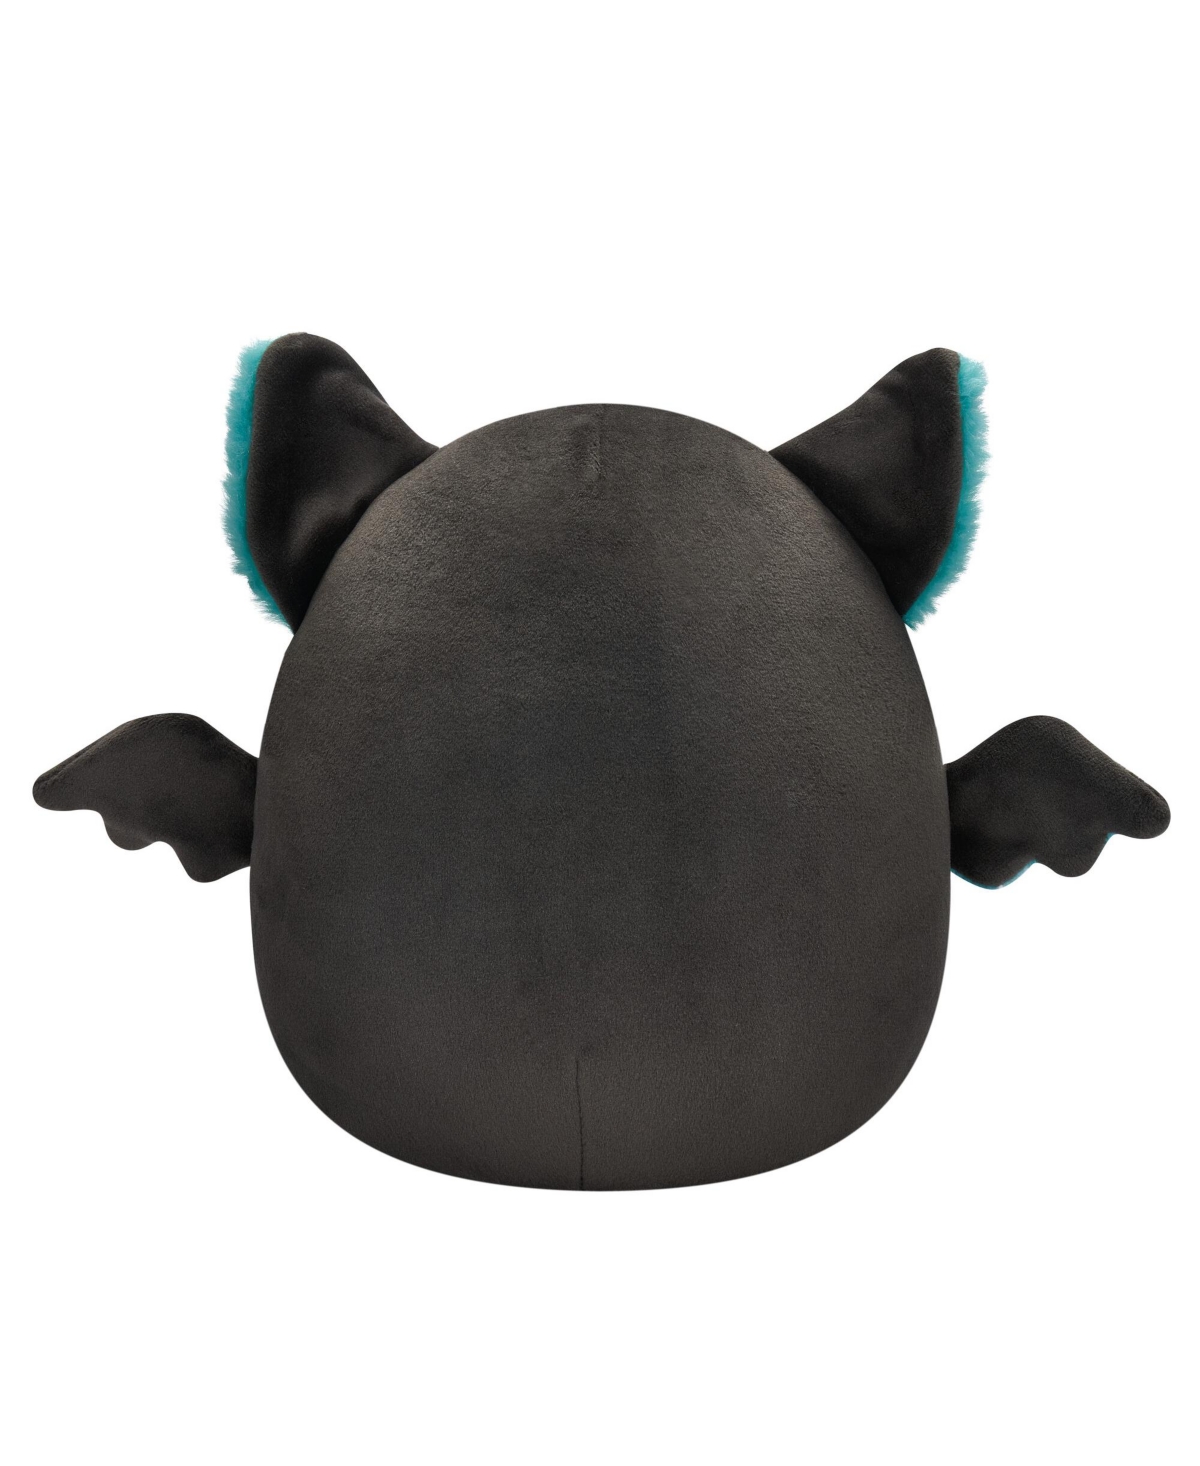 Shop Squishmallows 8" Teal And Black Fruit Bat Plush In Multi Color